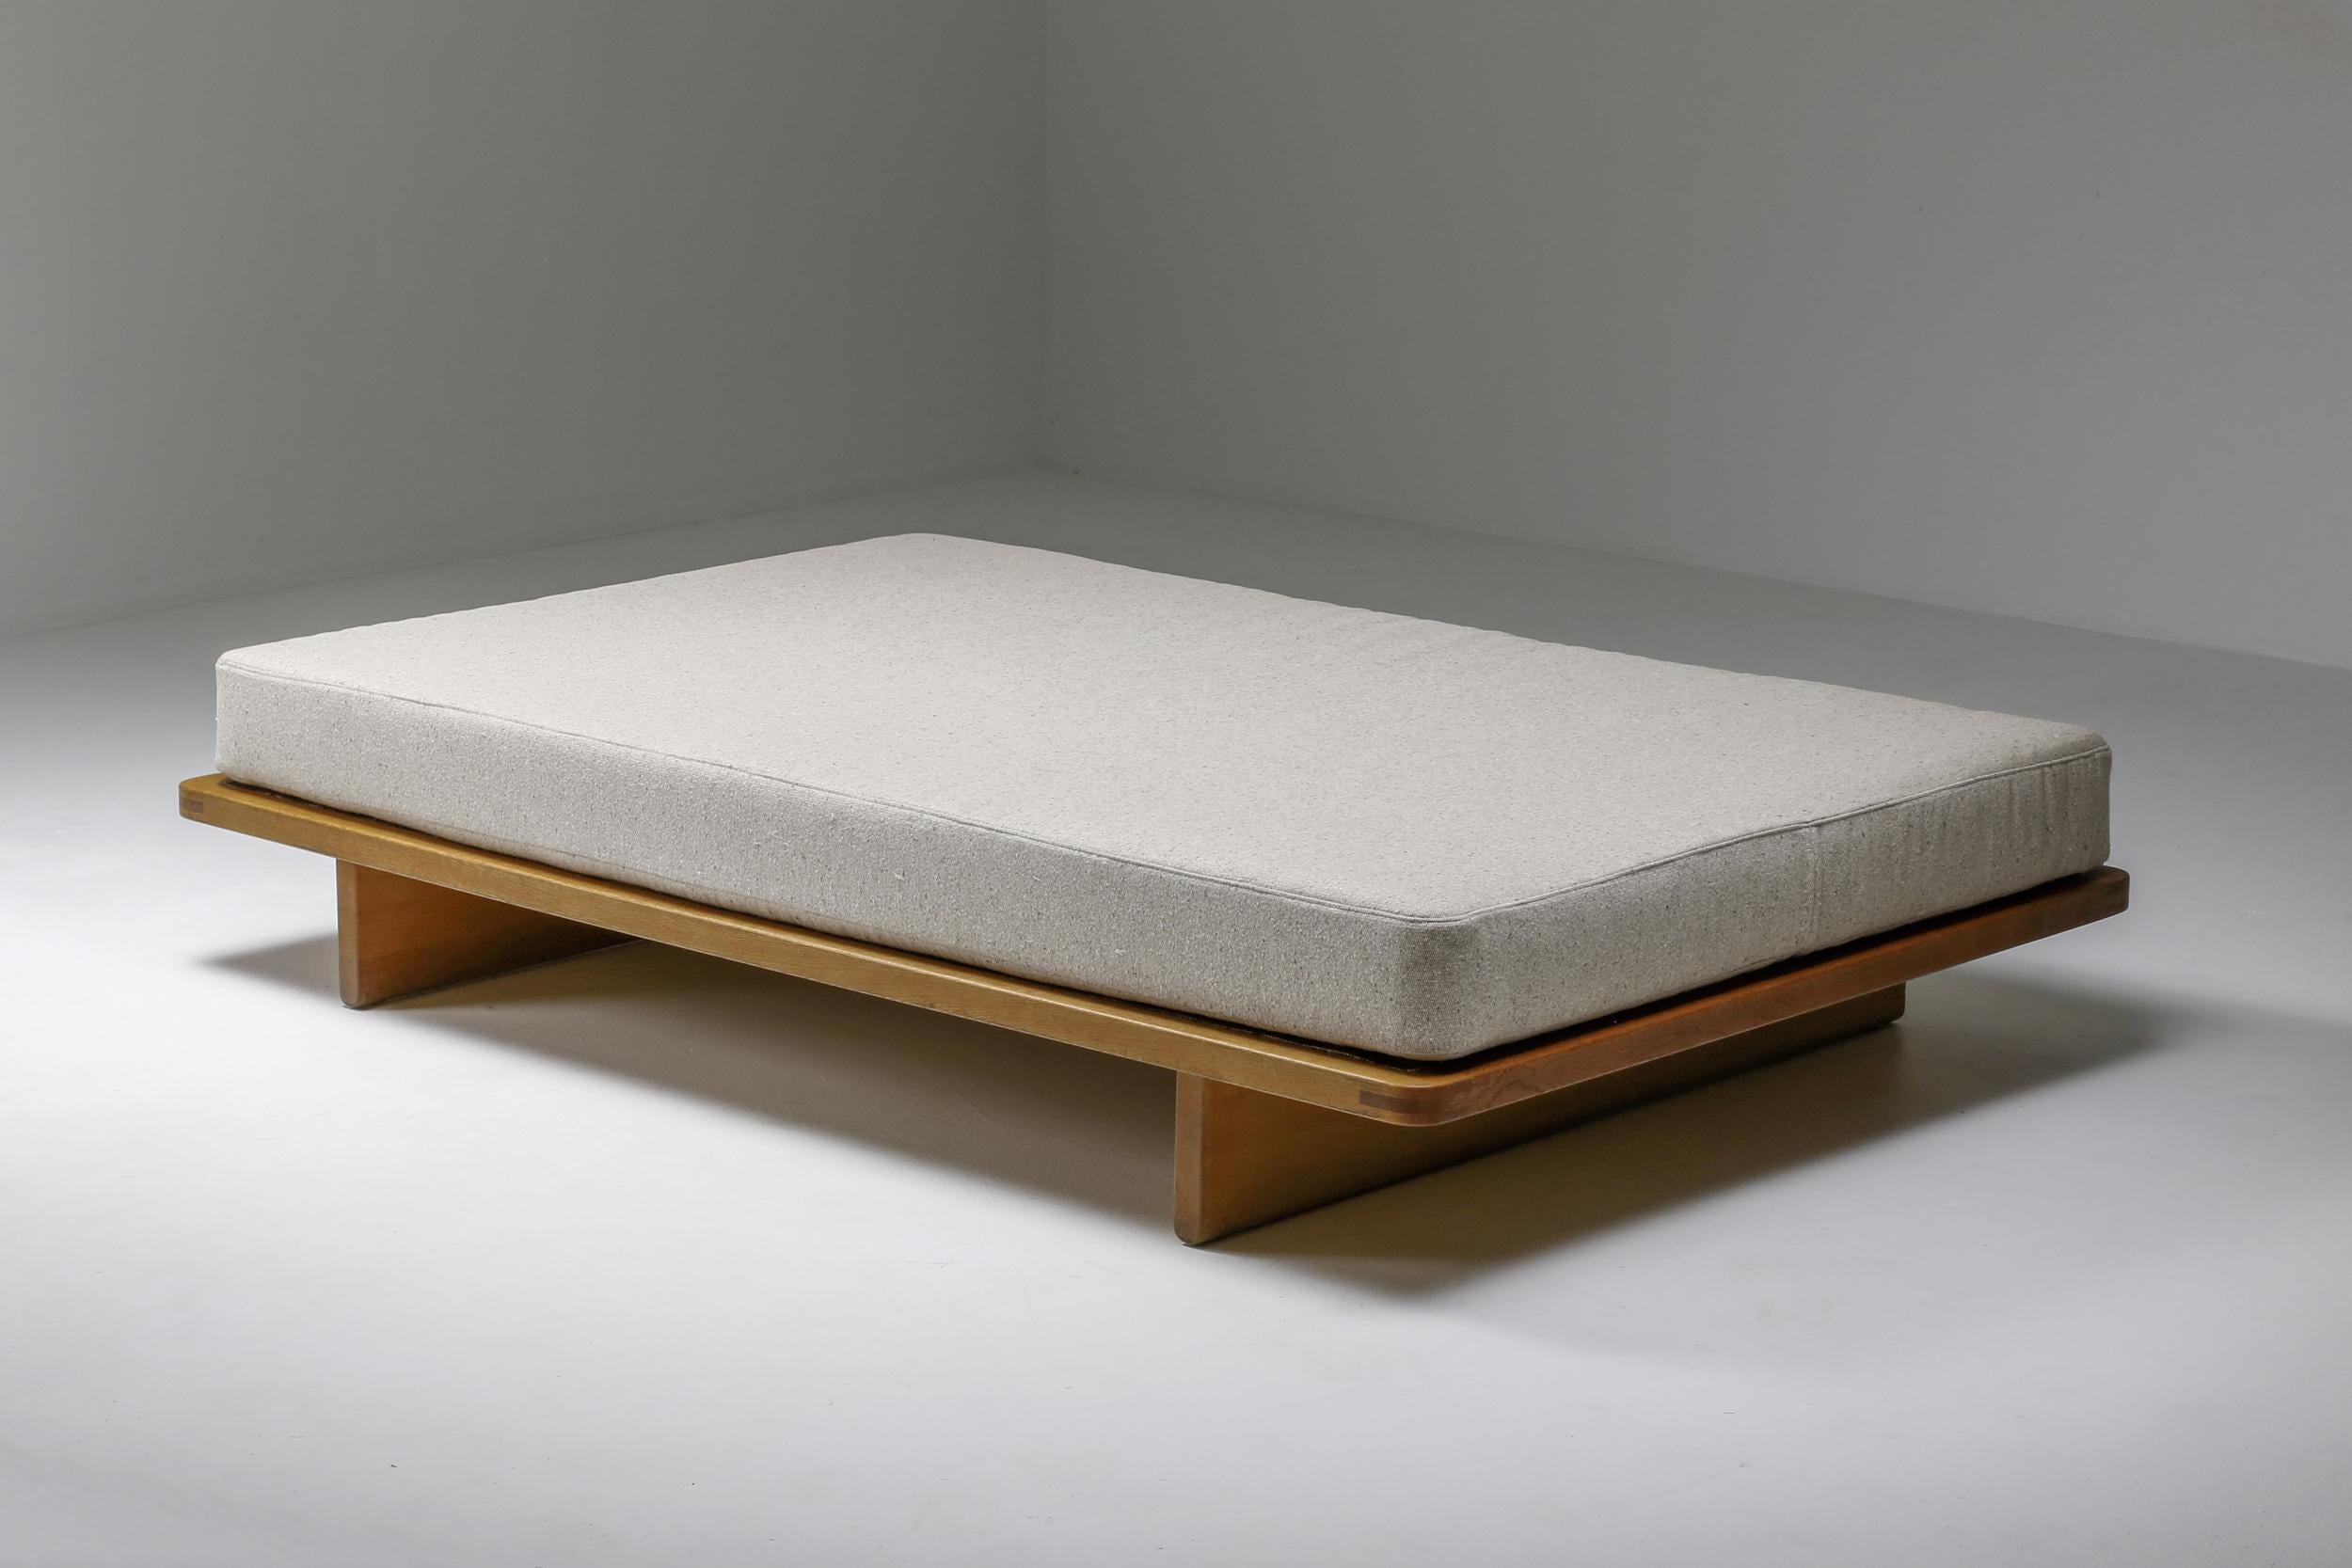 Børge Mogensen, daybed 192, 1958 for Fredericia Stolefabrik in Oak

This version is the rare large version, we've made a new mattress and upholstery.
Fits well in a Japan, zen, wabi sabi and and rustic minimalist inspired interior

Designer